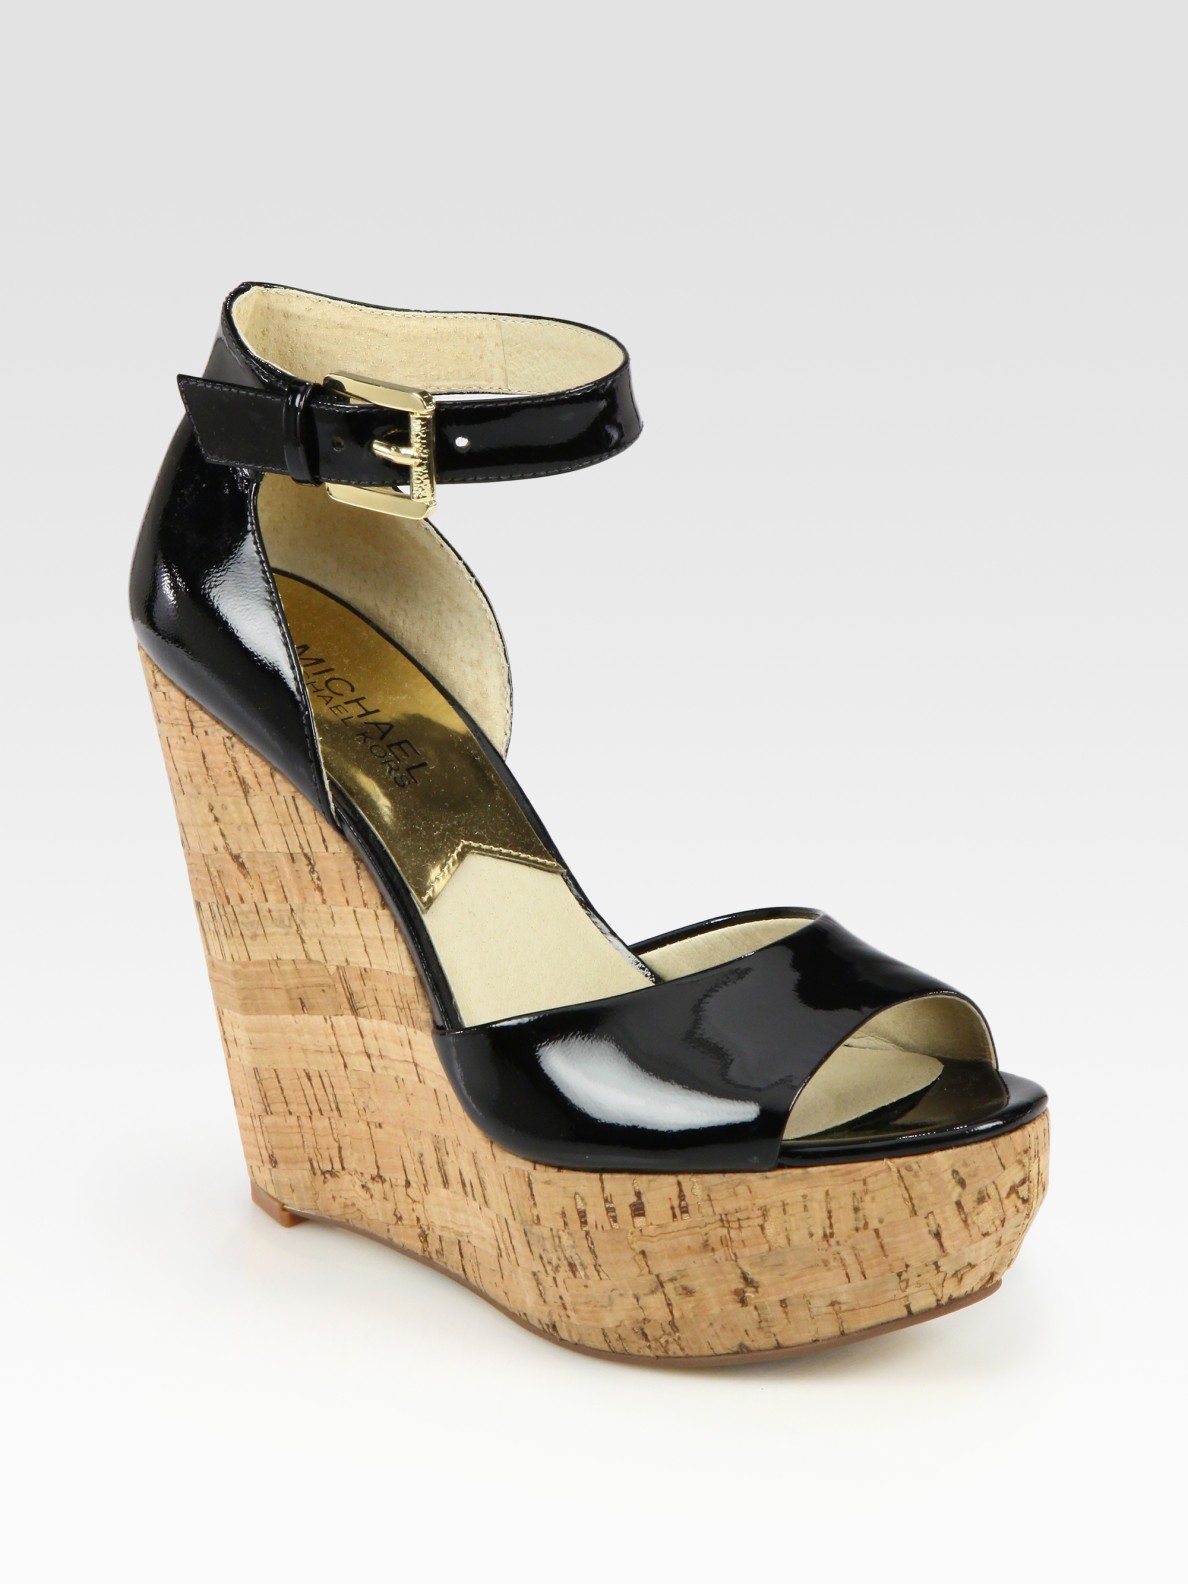 MICHAEL Michael Kors Ariana Patent Leather Cork Wedge Sandals in Black |  Lyst